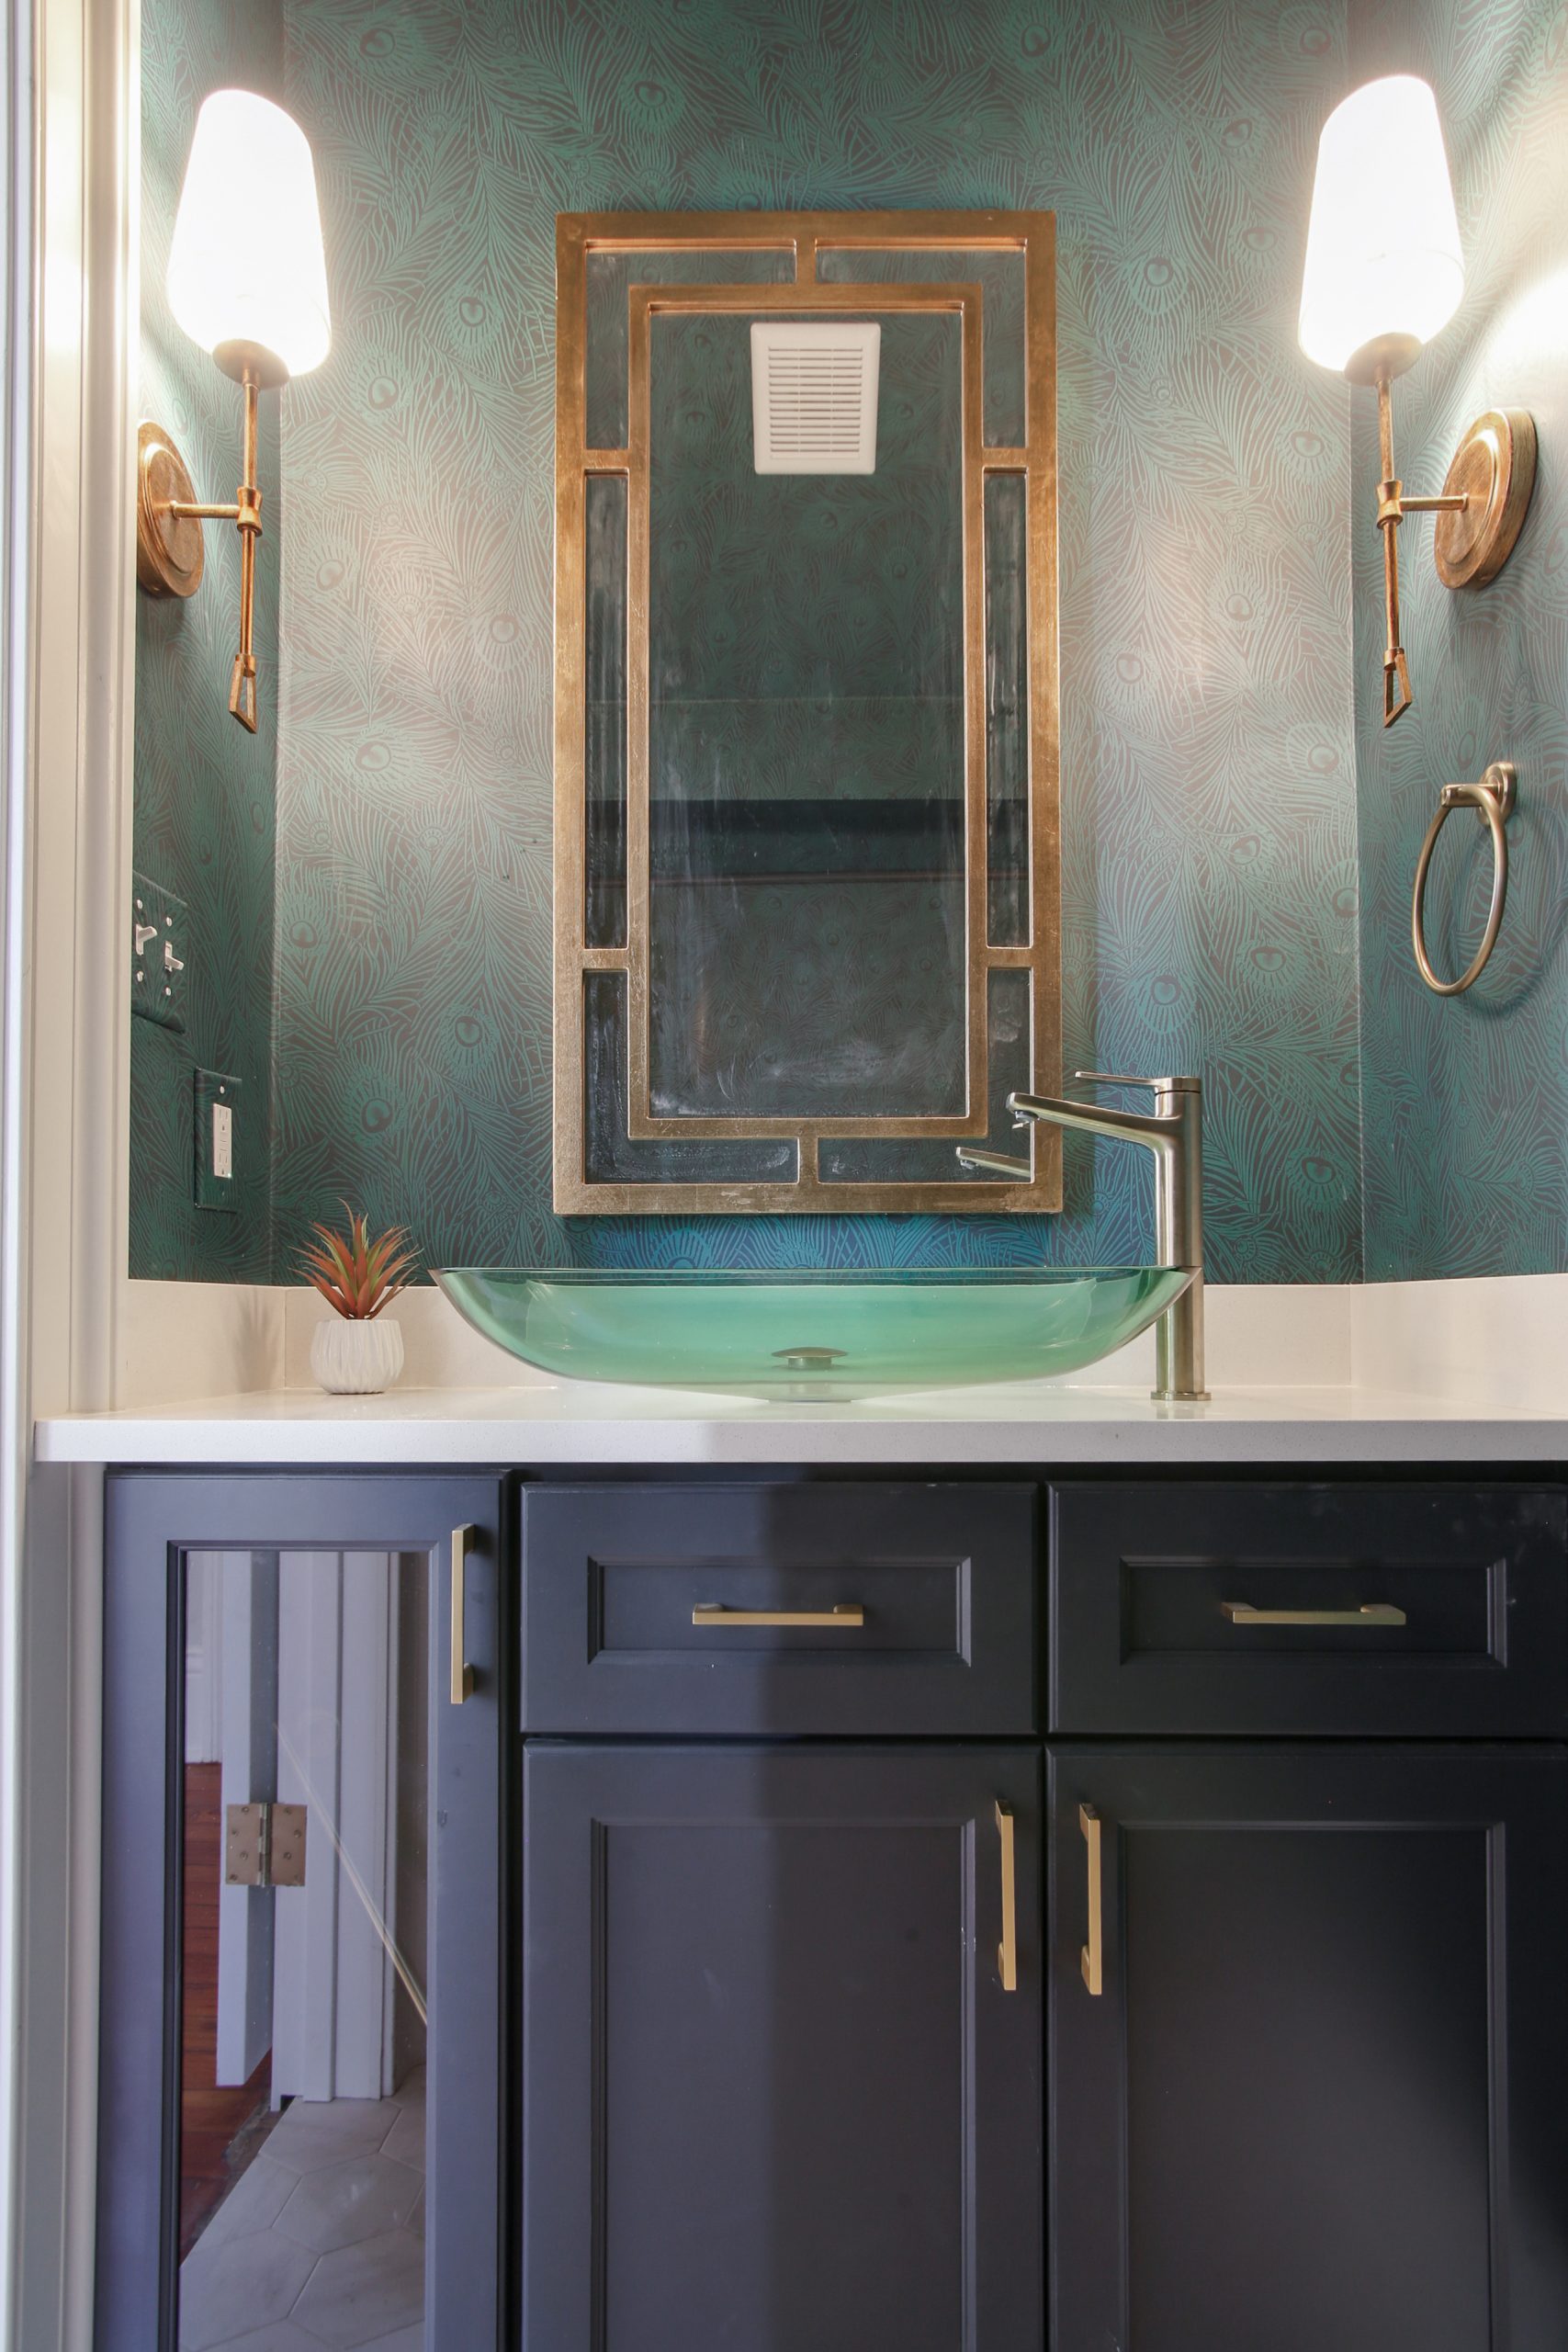 Grand House Luxury Historic Bathroom Renovation designed and built by DMG Design+Build